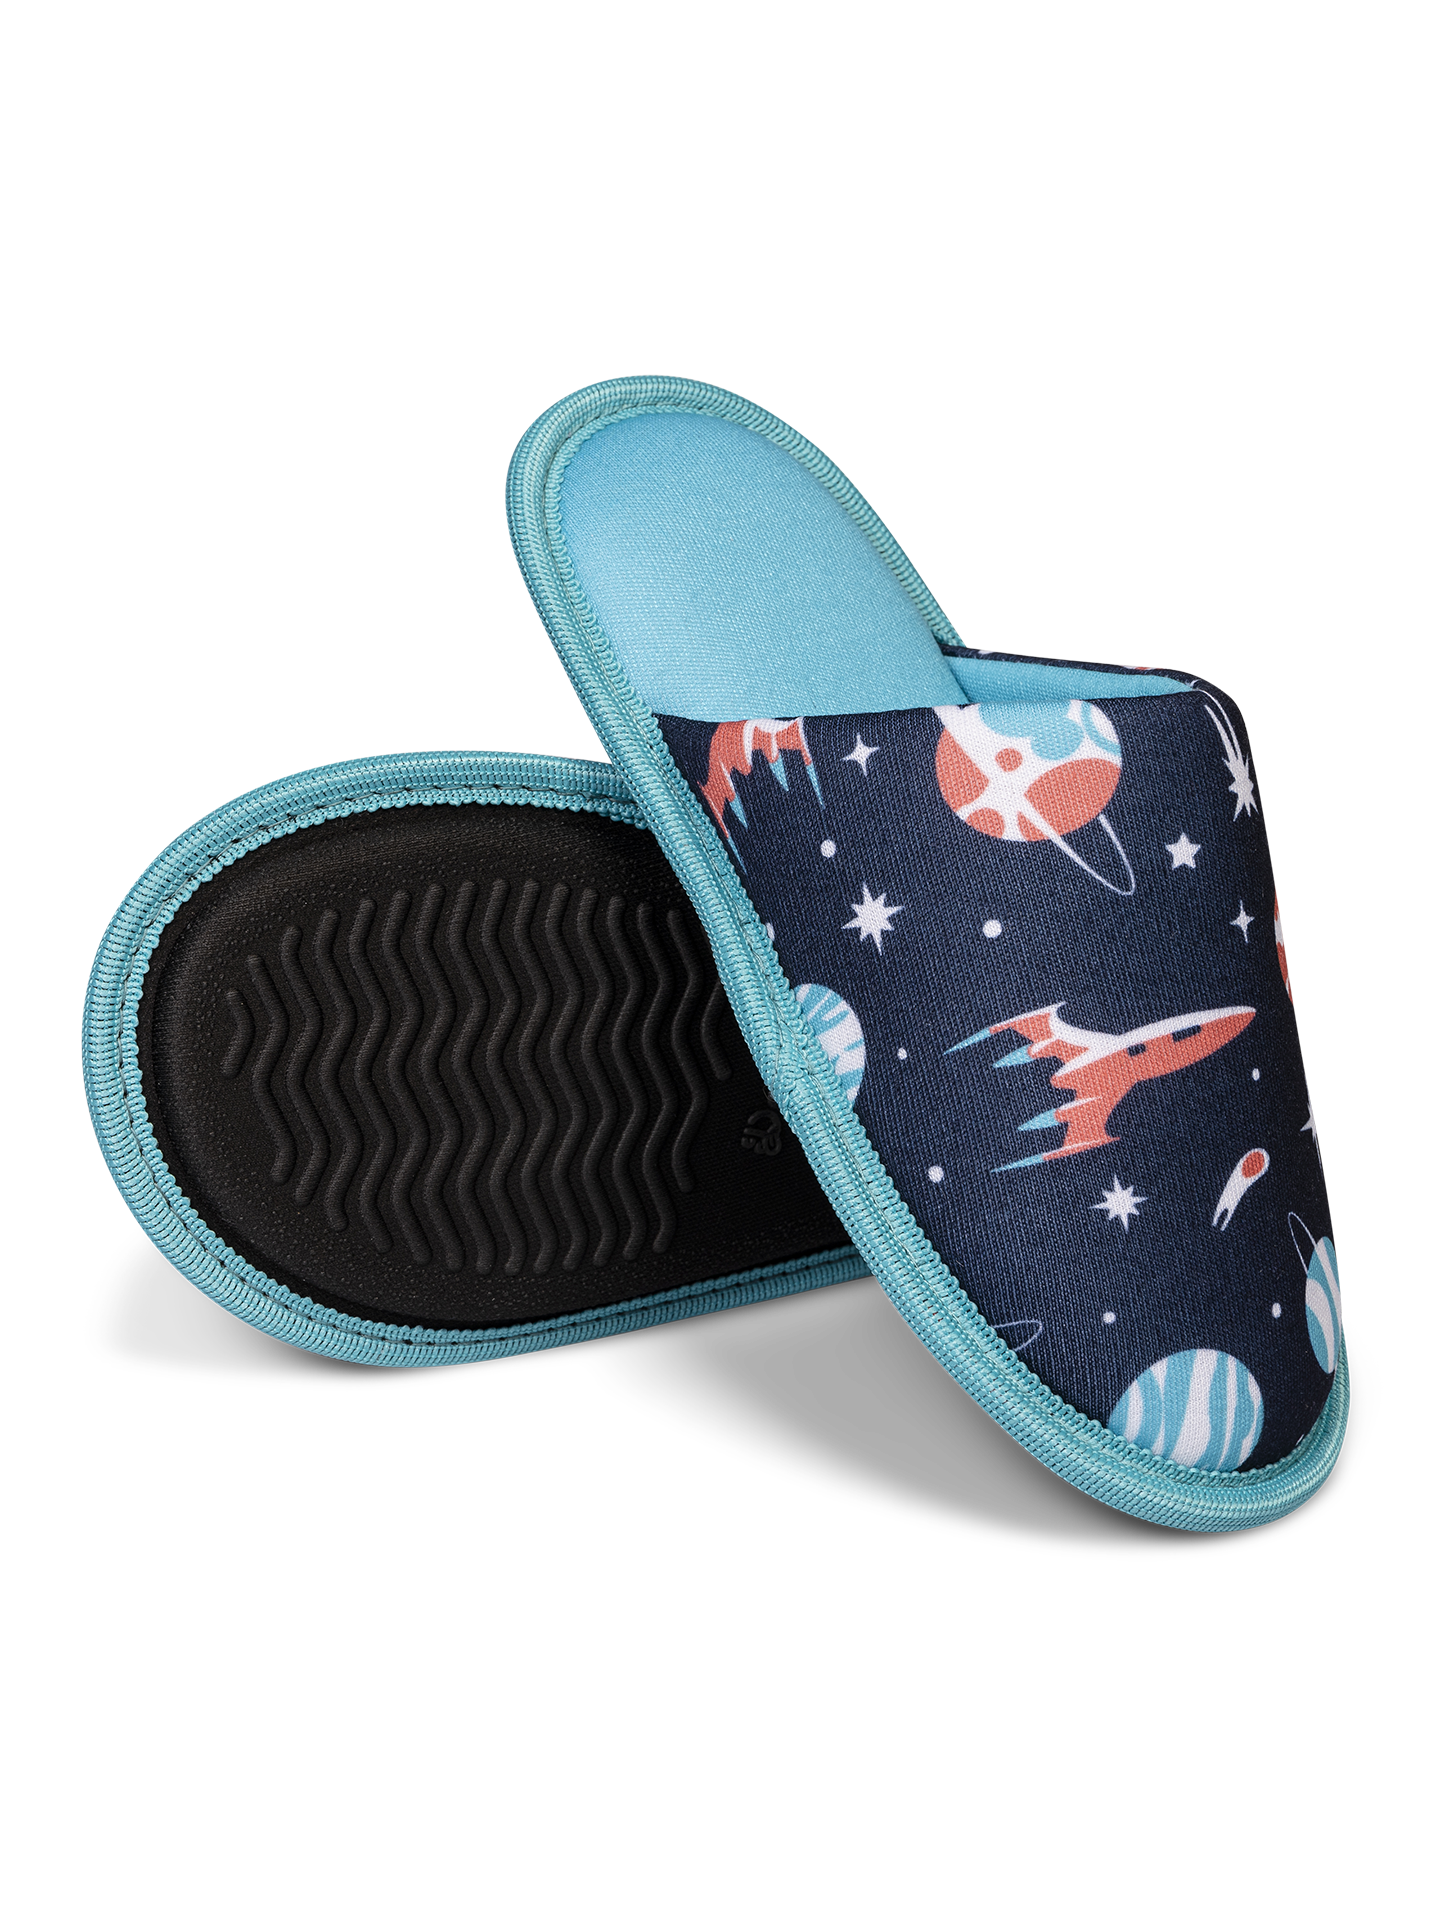 Kids' Slippers Planets